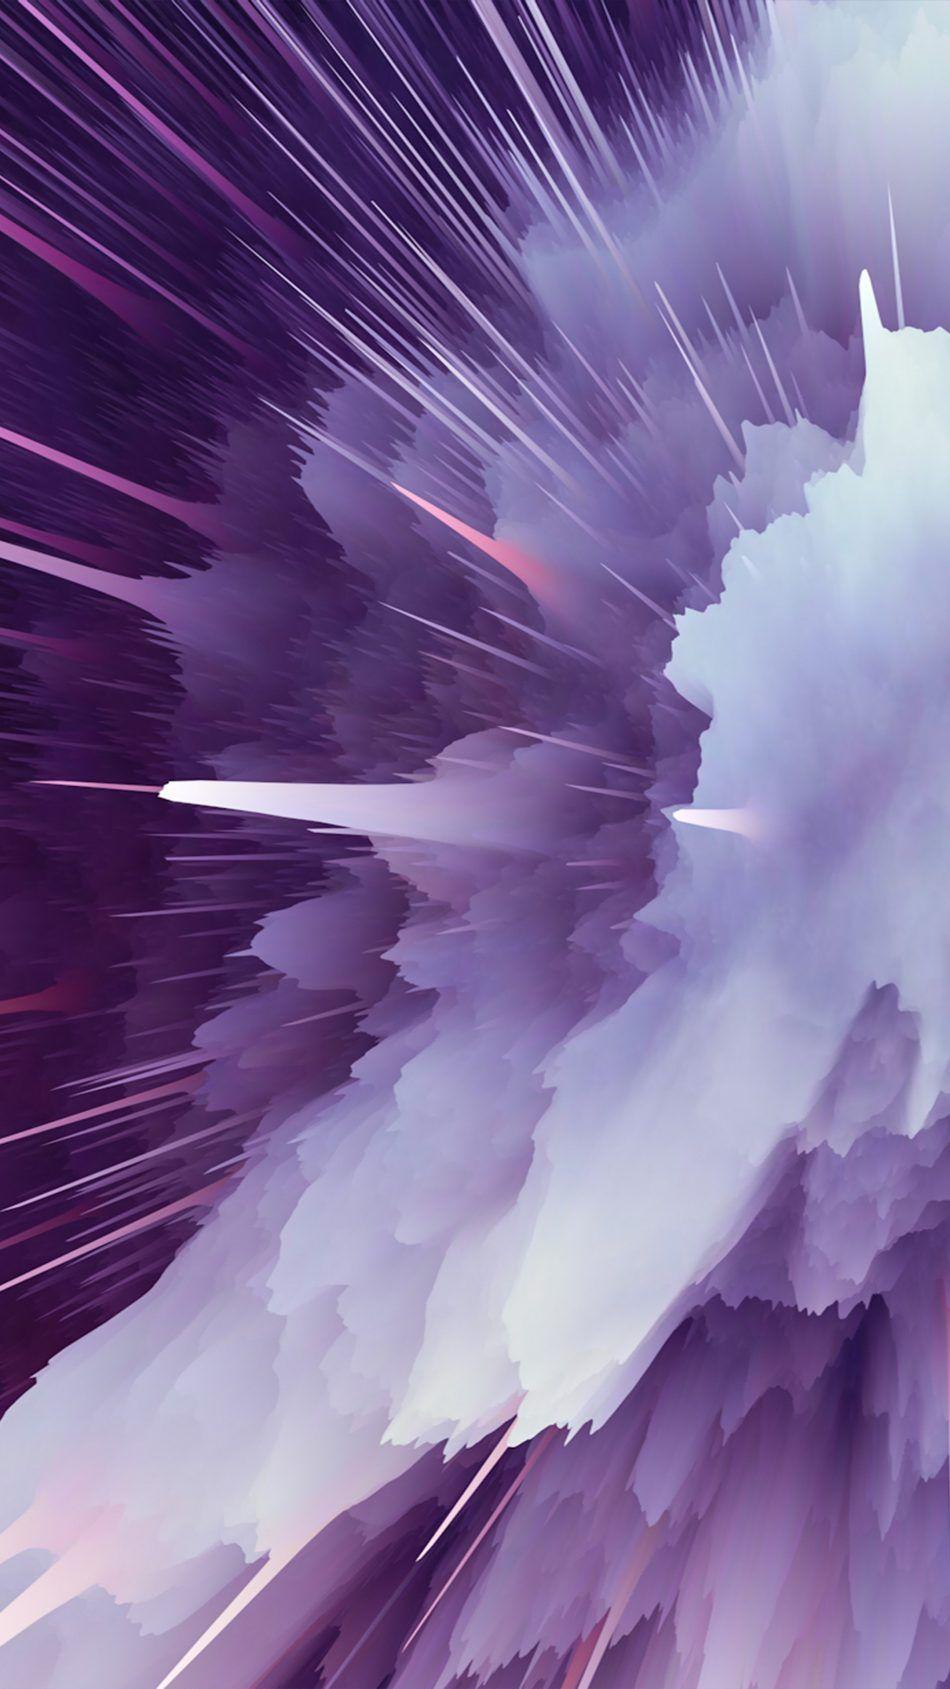 Purple Particle Explosion 4K Ultra HD Mobile Wallpaper. HD phone wallpaper, Qhd wallpaper, Abstract wallpaper background